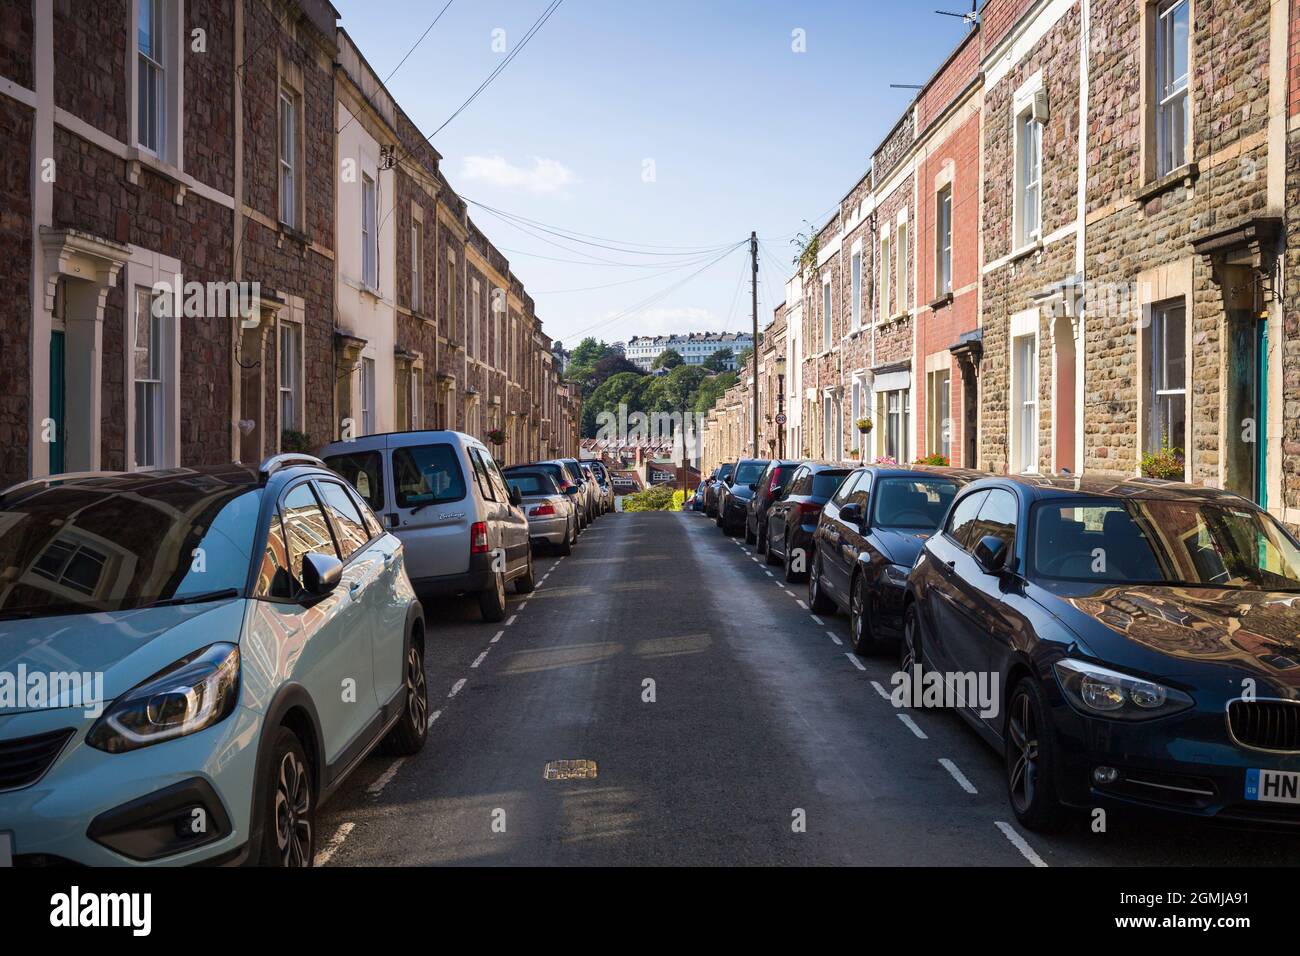 Typical street of Victorian terraced houses in the Cliftonwood neighbourhood of Bristol, UK. Stock Photo